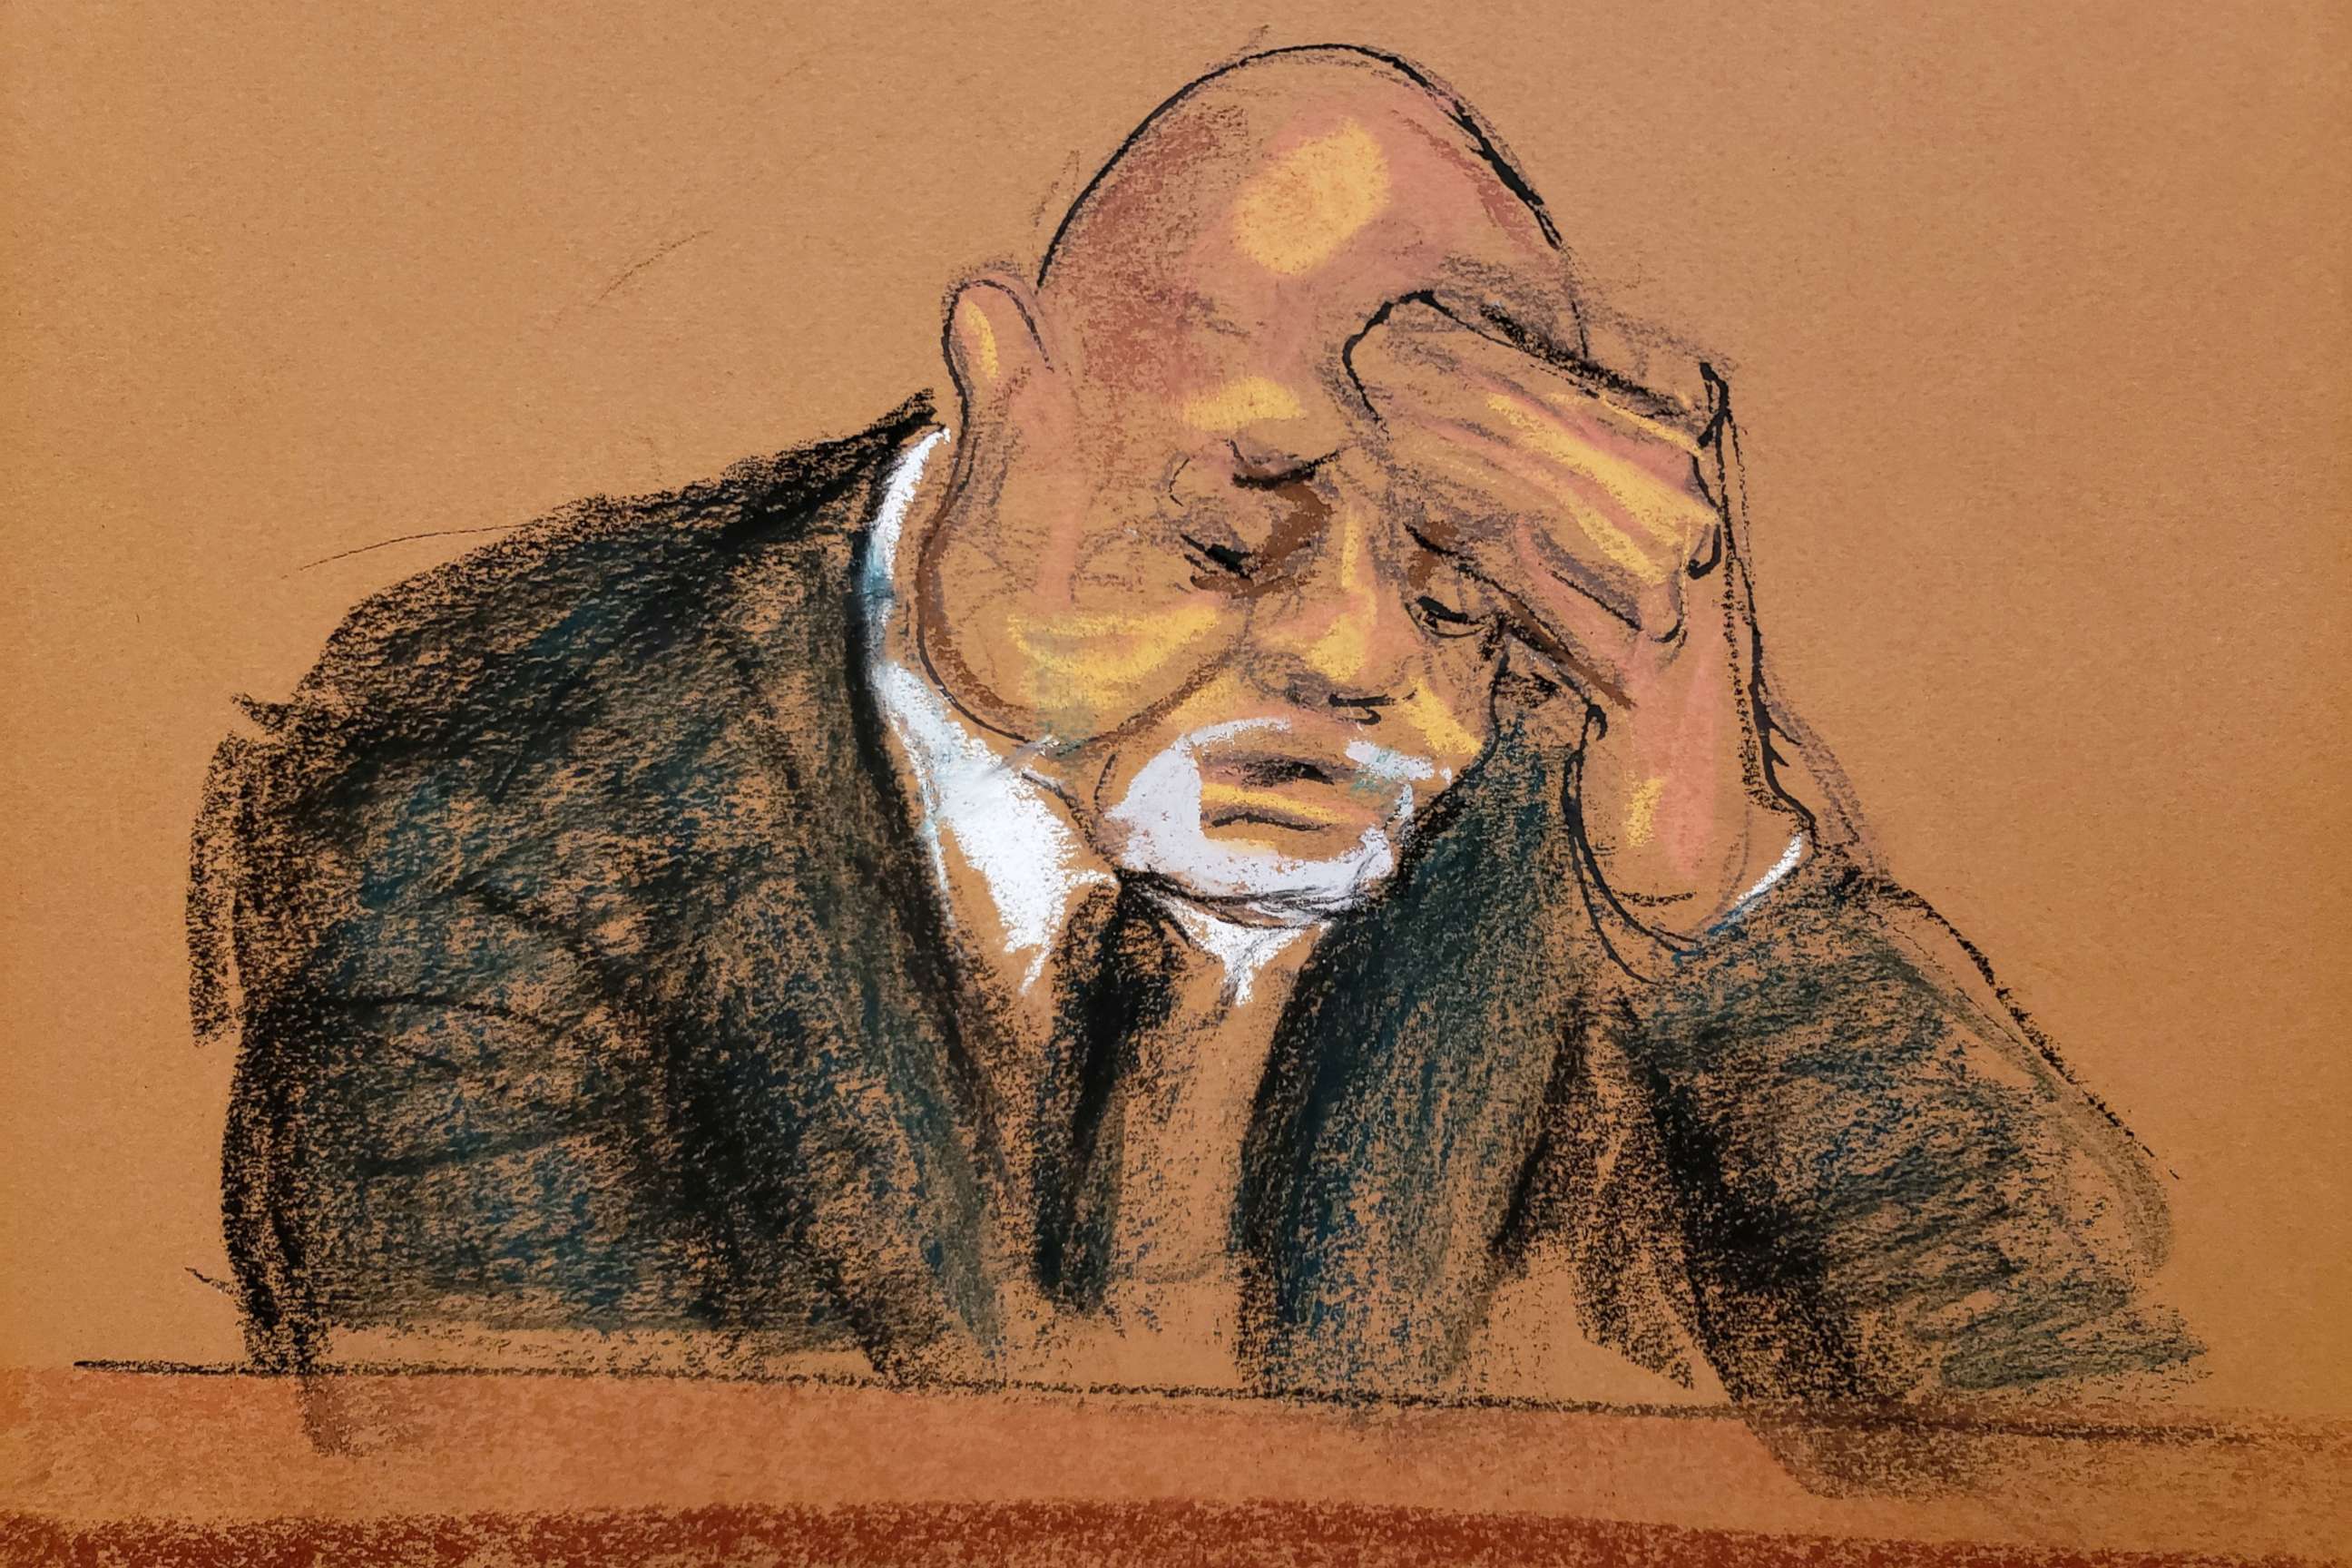 PHOTO: Juan Alessi, Jeffrey Epstein's house manager, reacts while speaking about stealing money from Epstein during the trial of Ghislaine Maxwell in a courtroom sketch in New York City, Dec. 2, 2021.